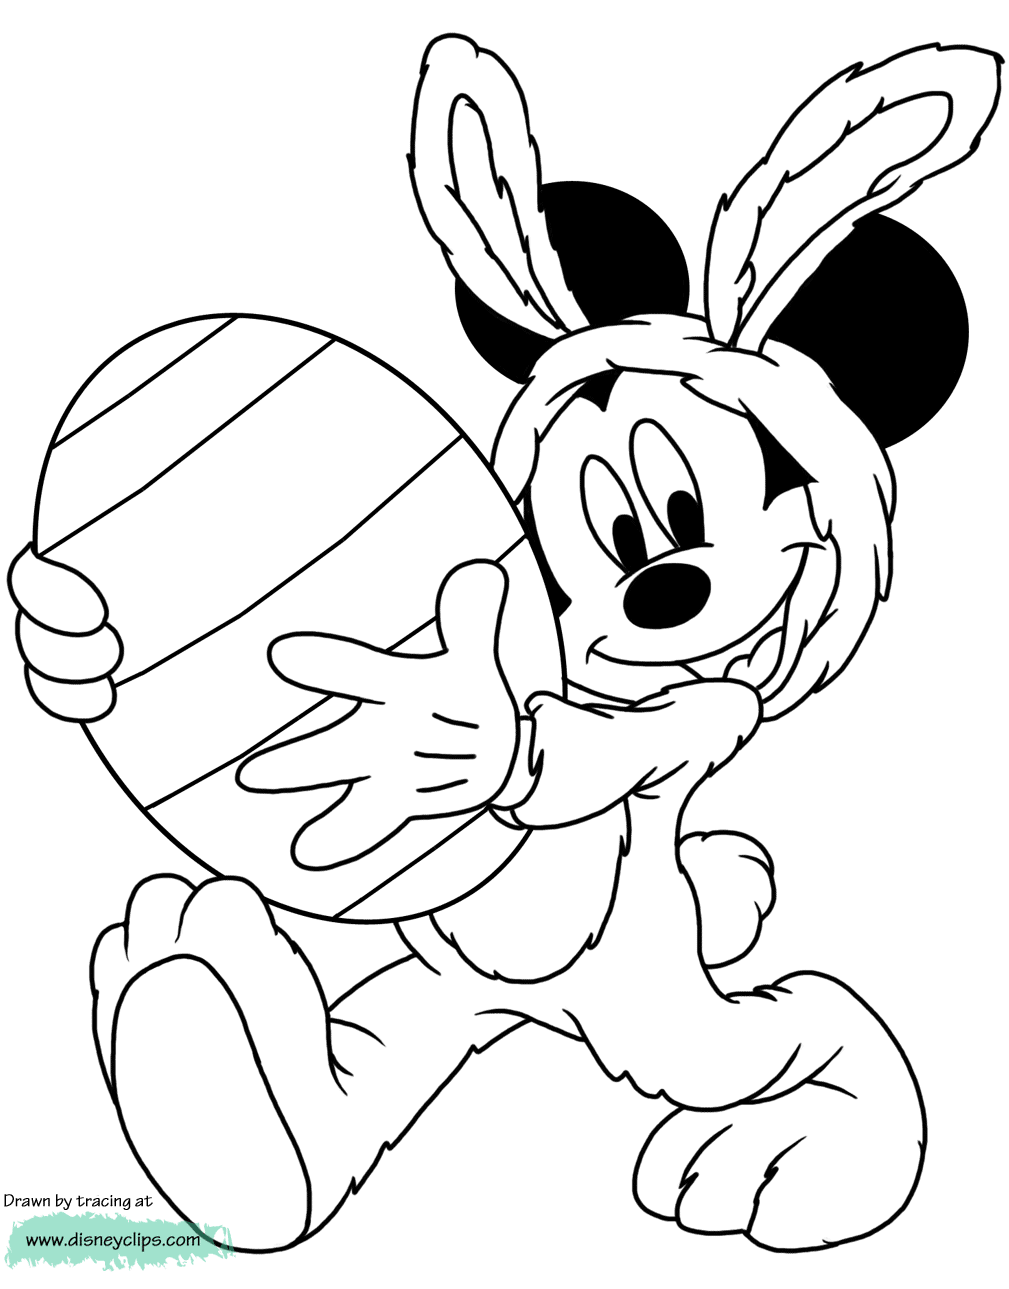 Disney Easter Coloring Pages 2 Easter Fun at Disney39s